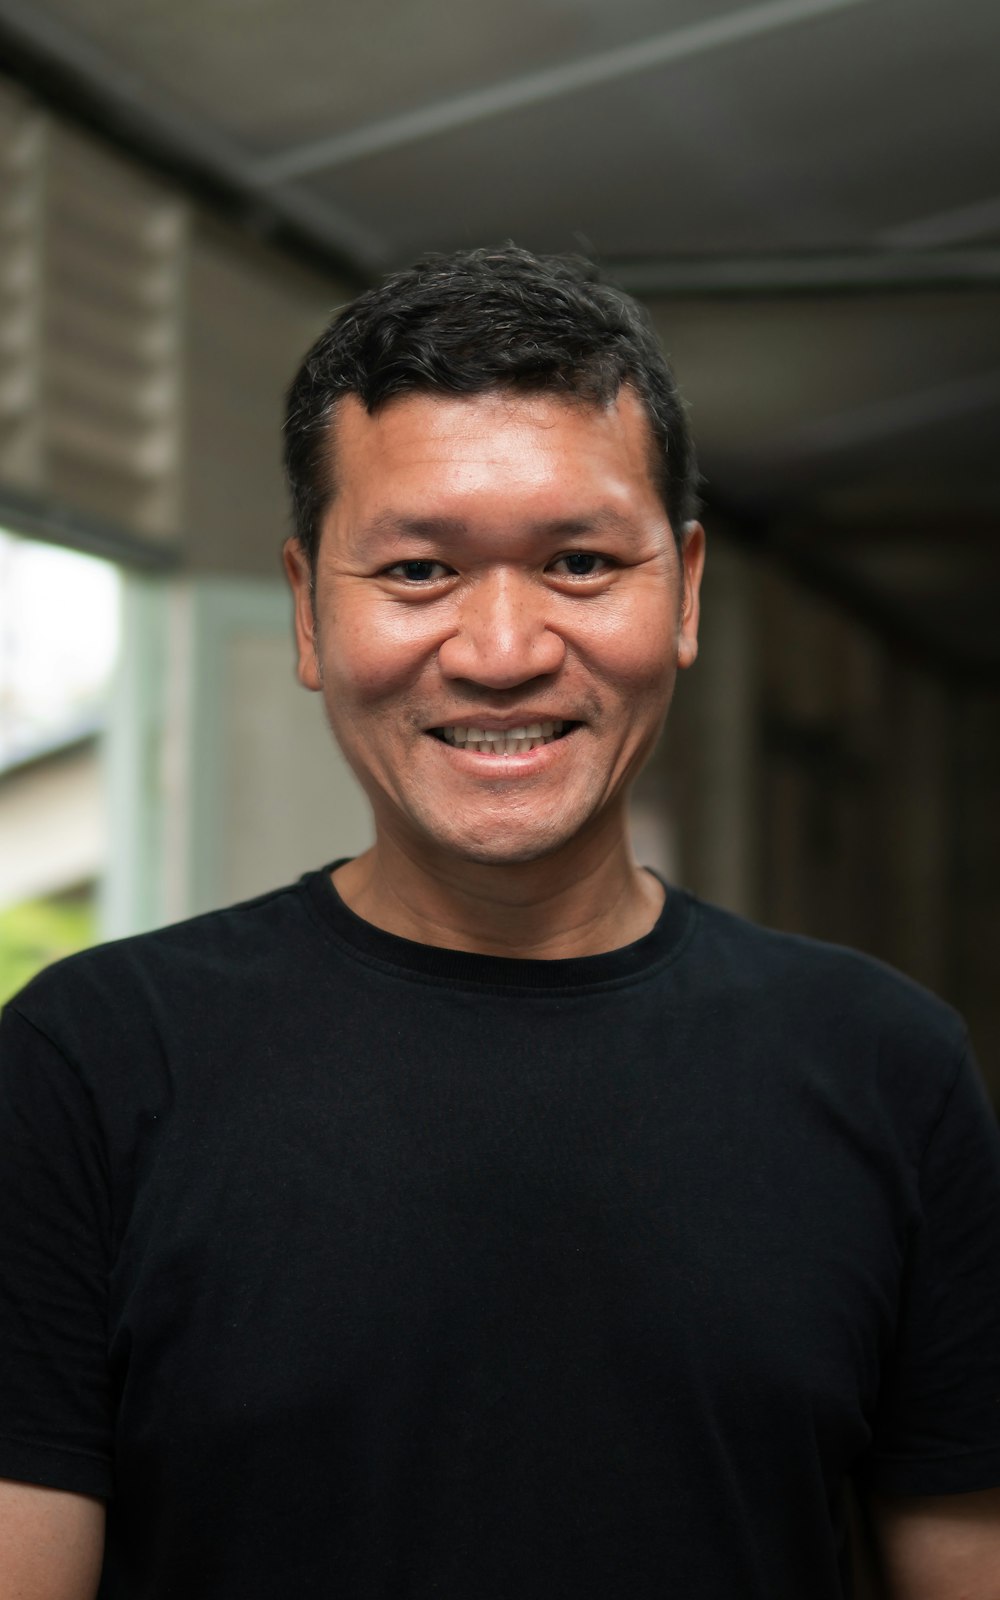 a man in a black shirt smiling at the camera